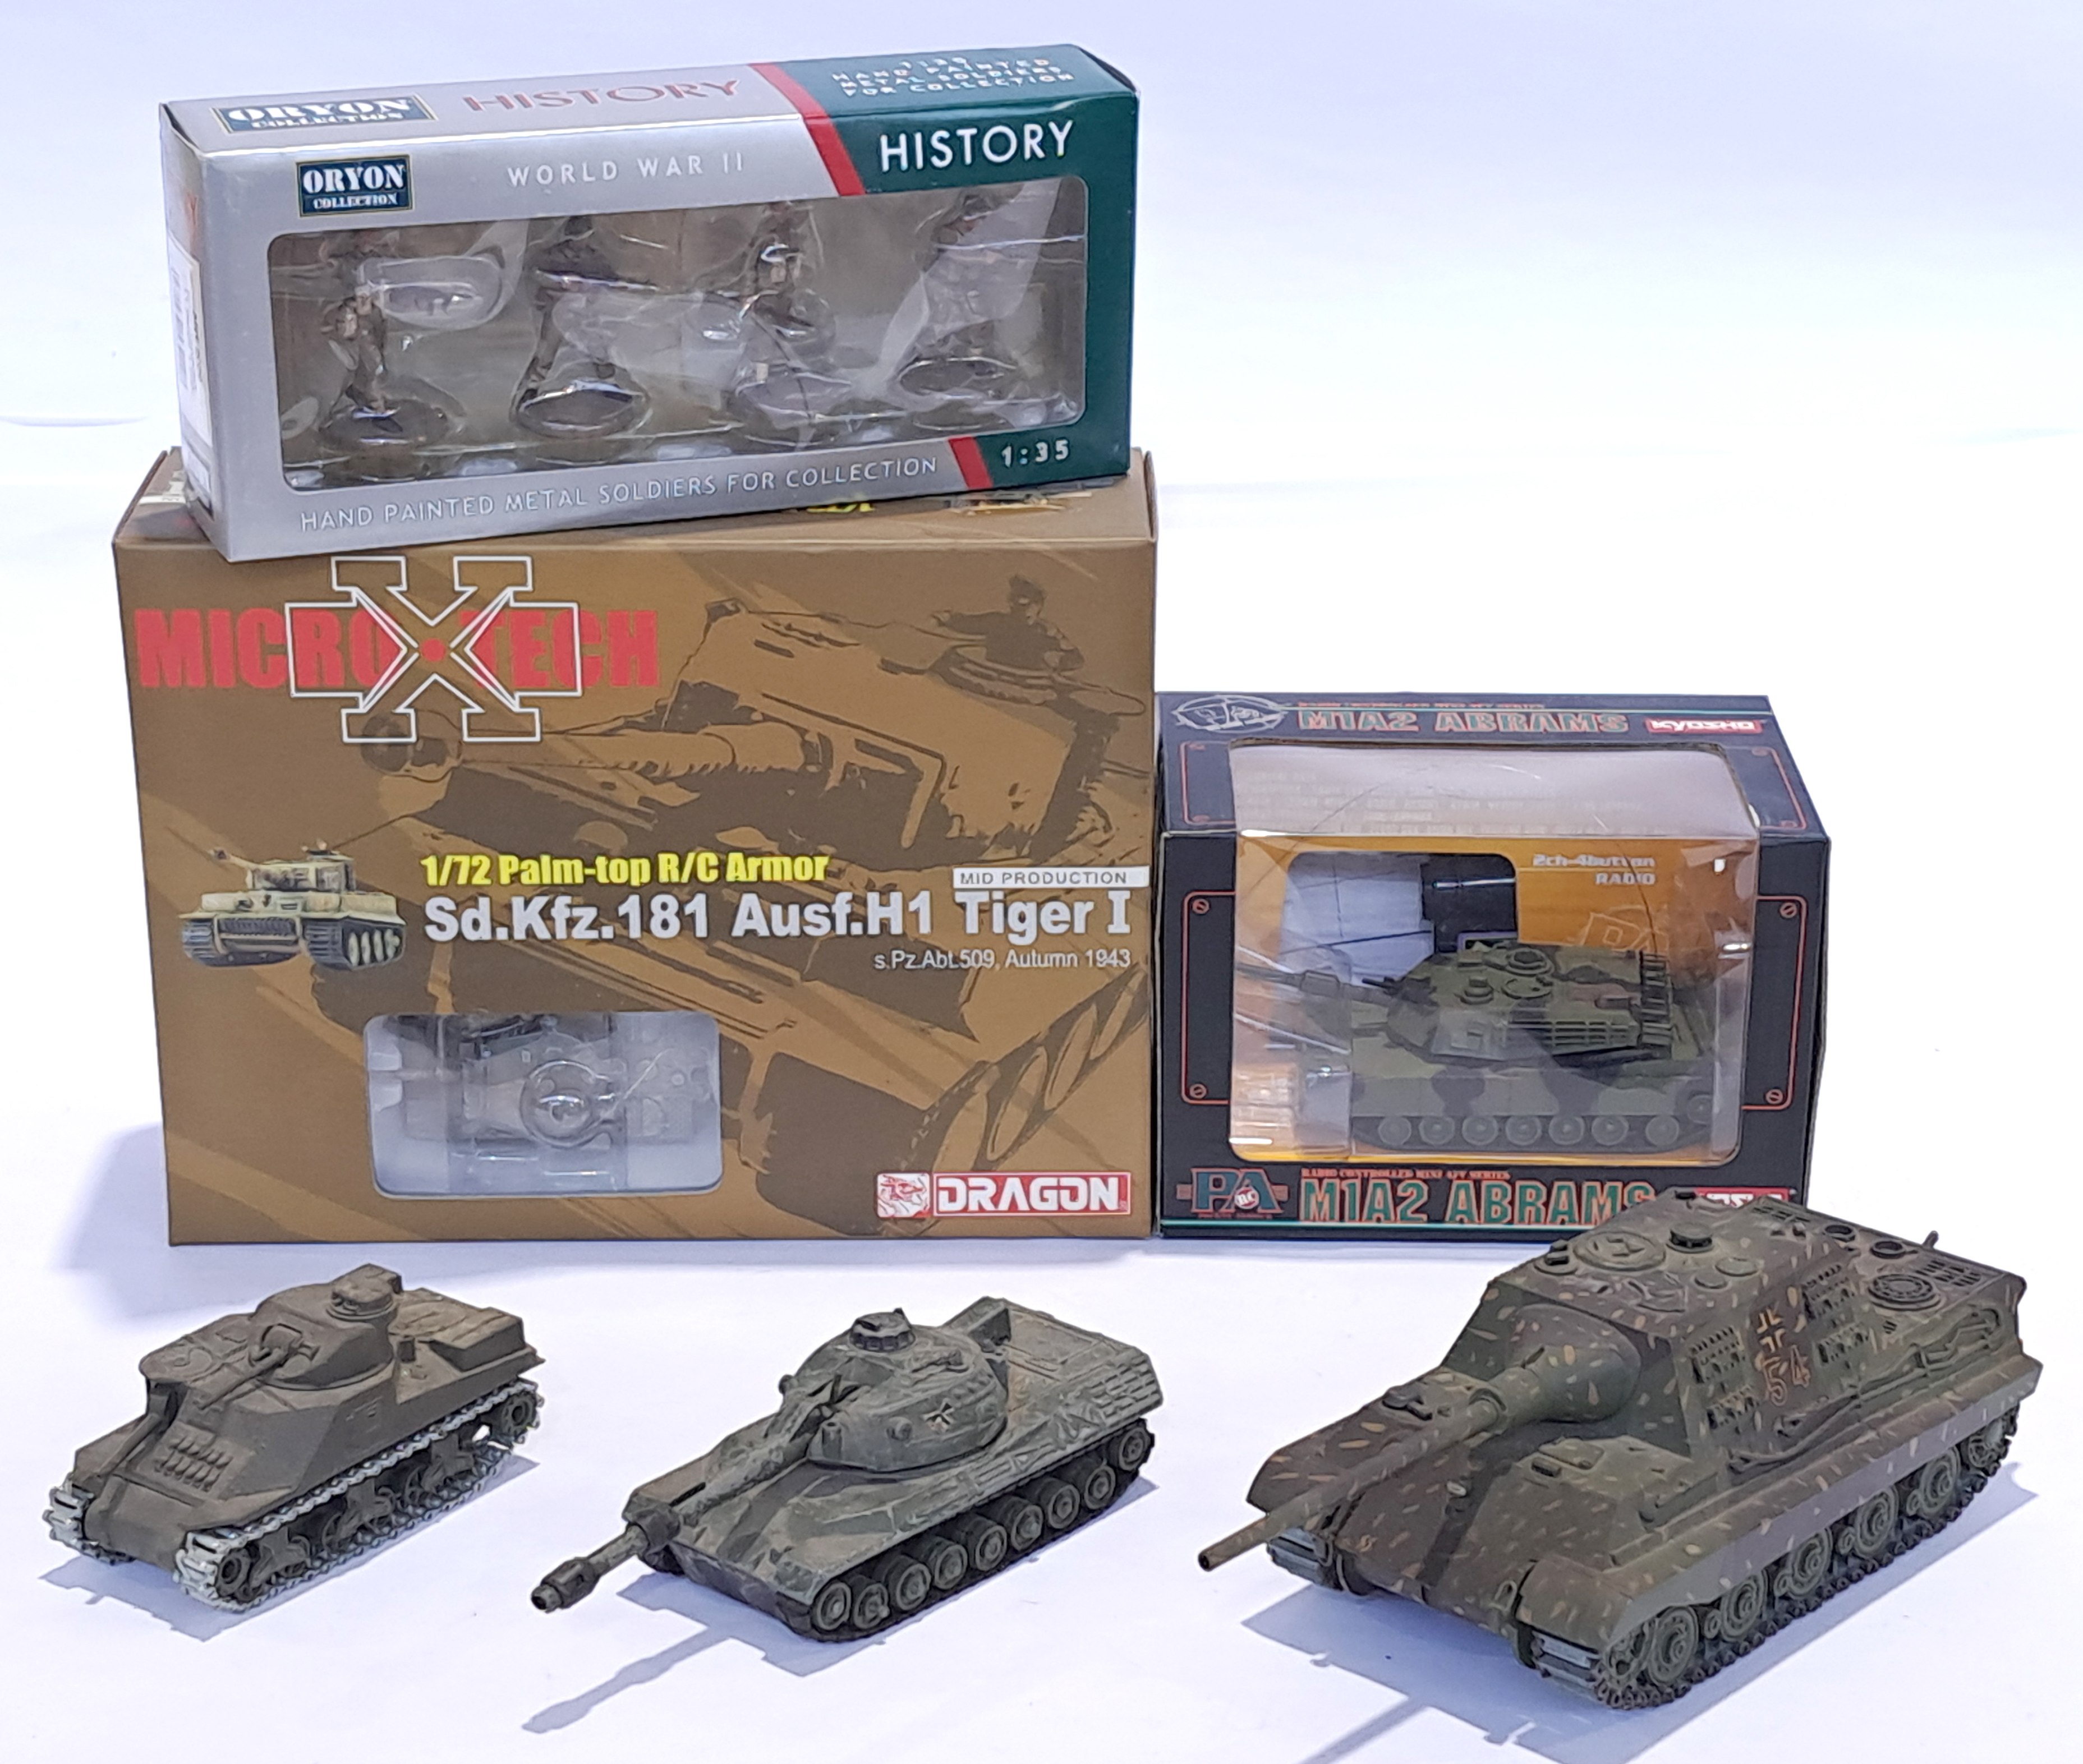 Dragon, Kyosho, Oryon & similar, a boxed & unboxed military group